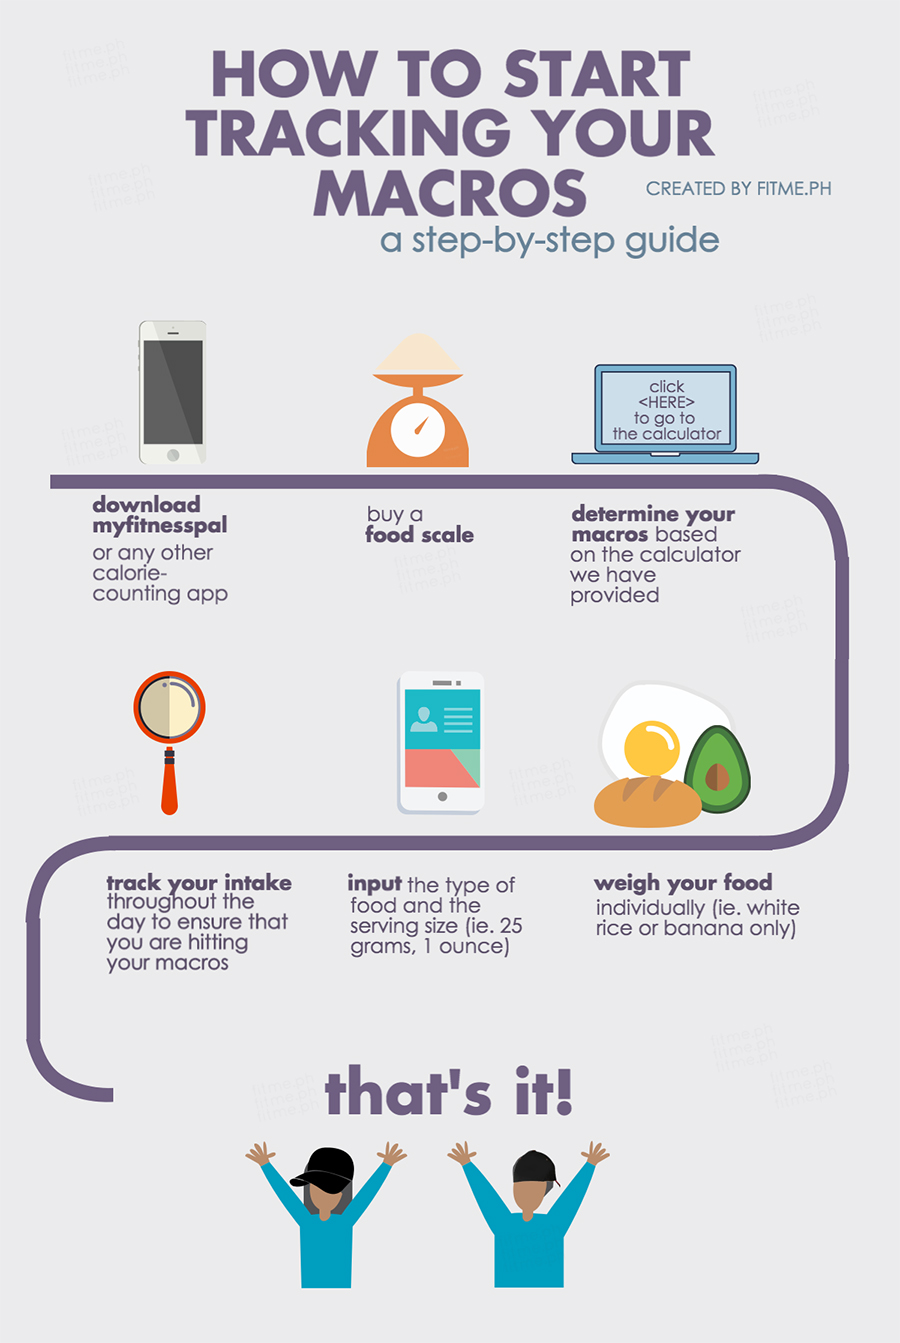 how to track macros infographic